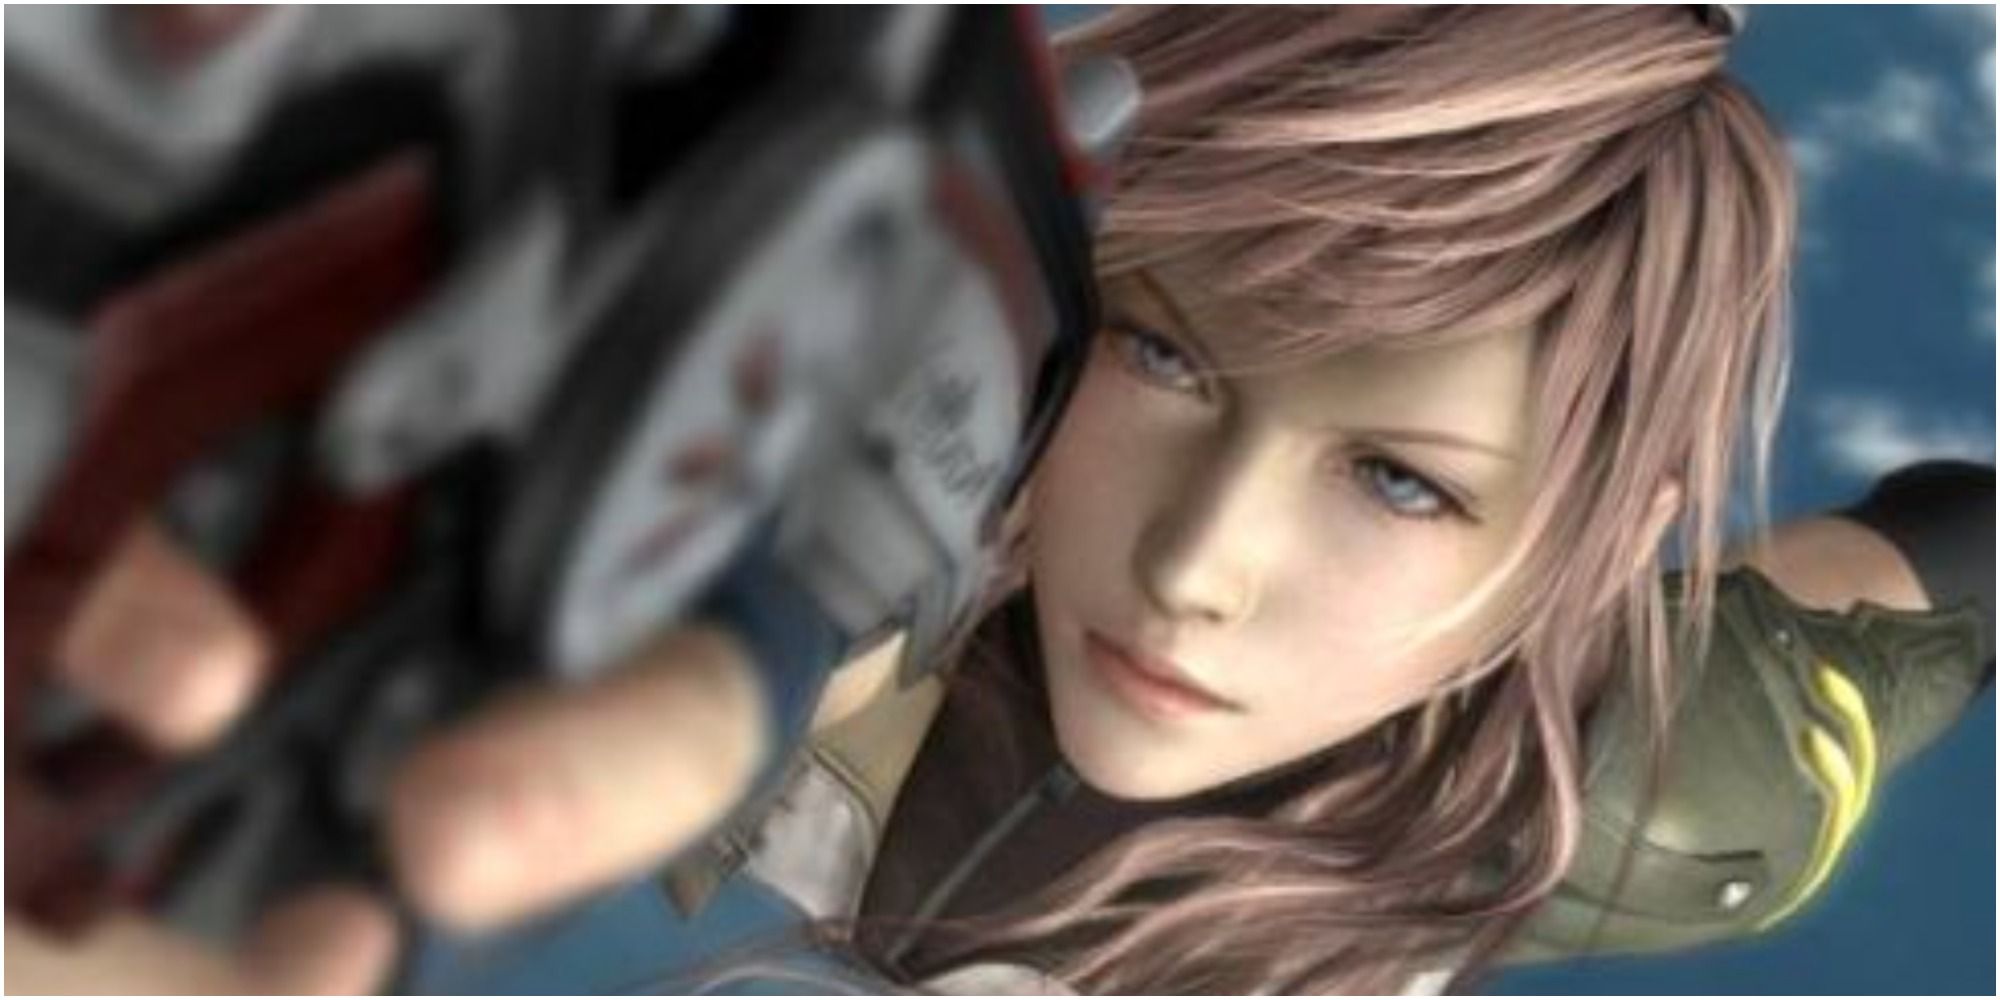 Lightning from Final Fantasy 13 representing the Ravager Paradigm